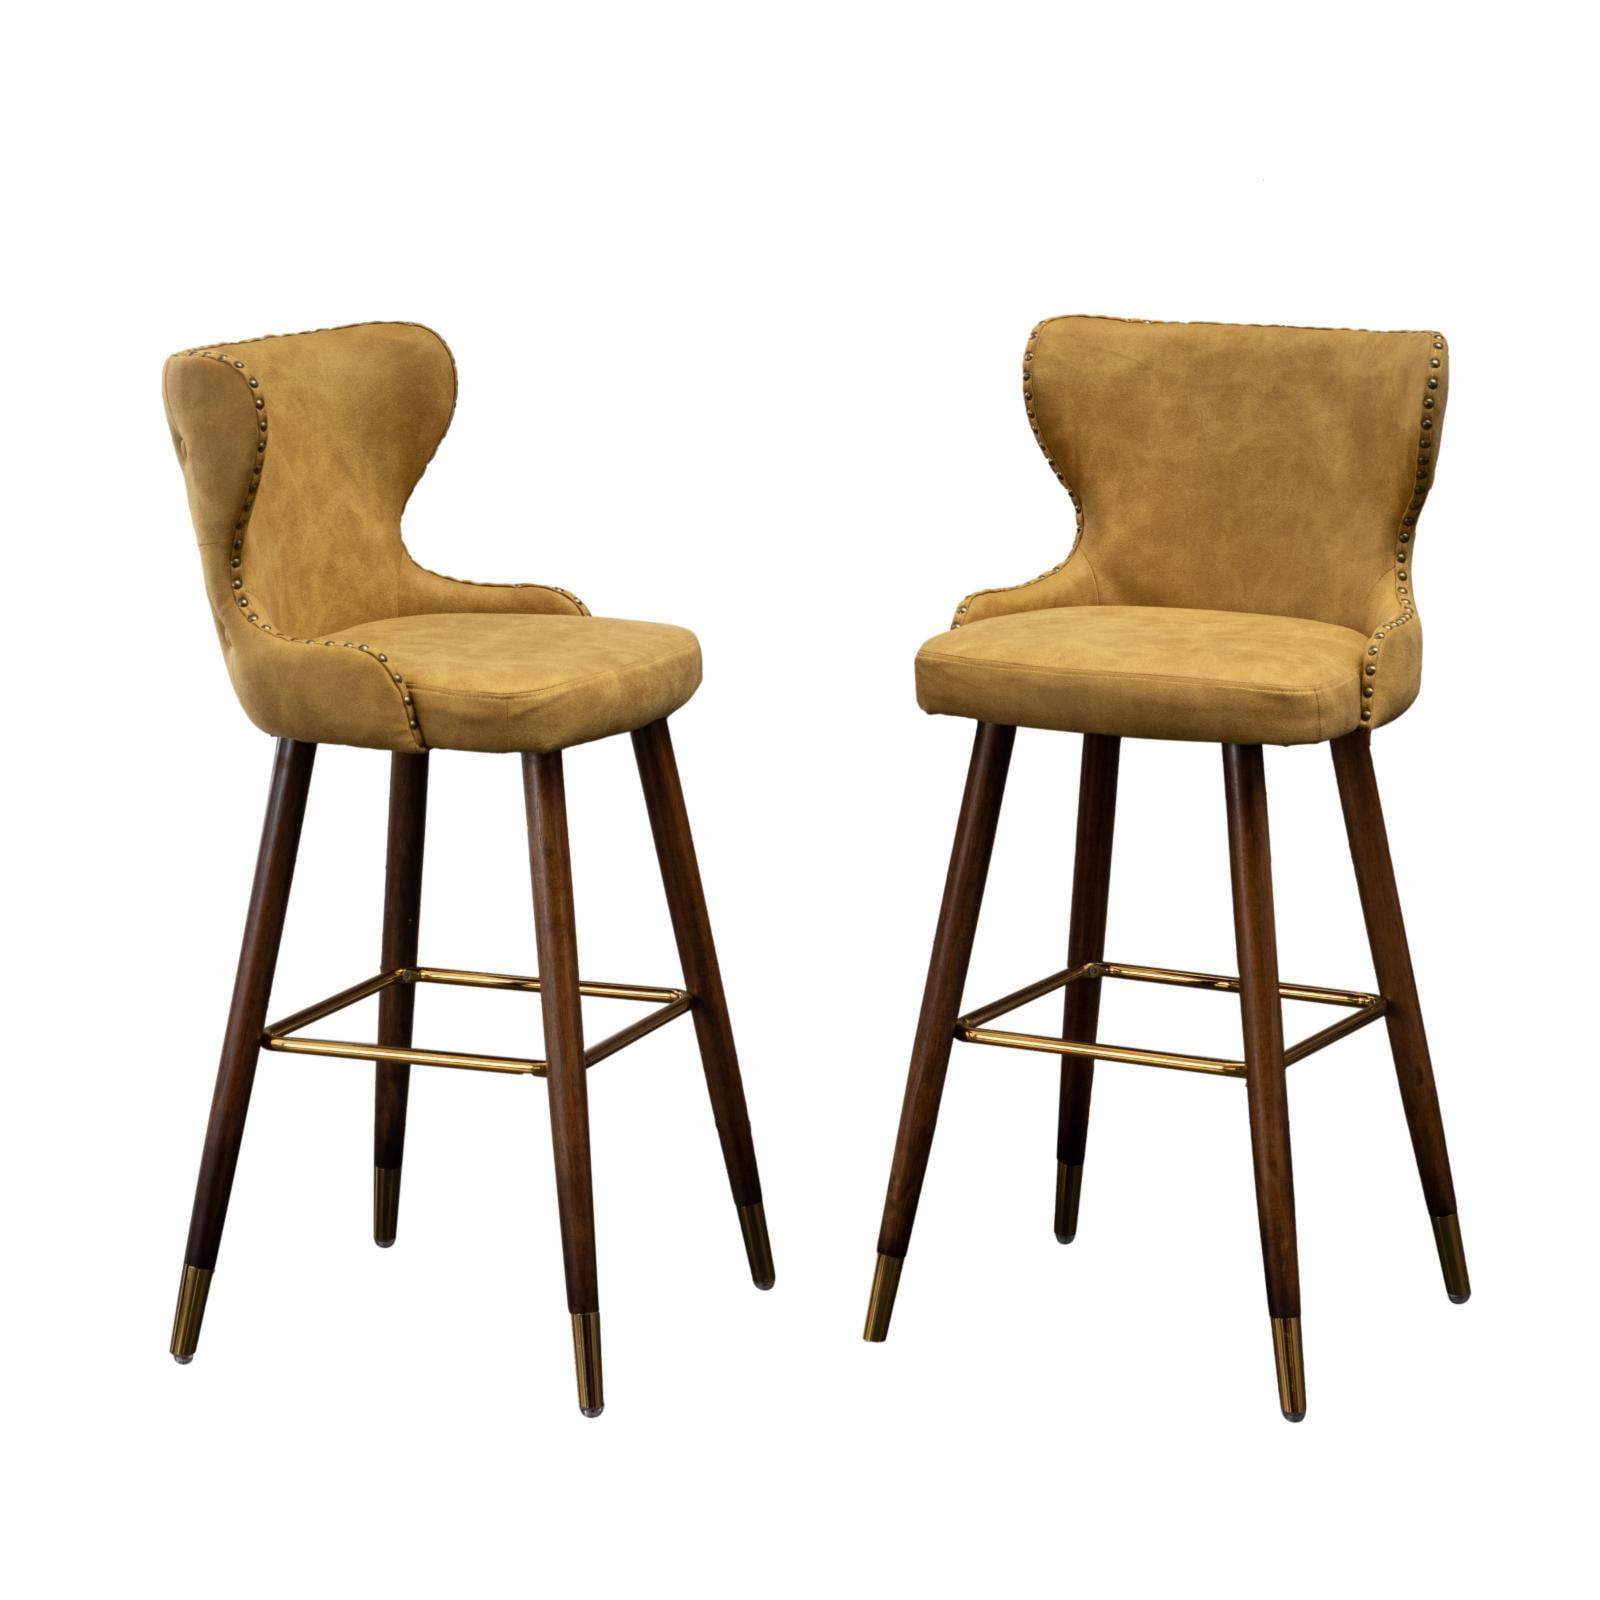 Mid-Century Modern Yellow Faux Leather Barstool Set with Gold Metal Accents